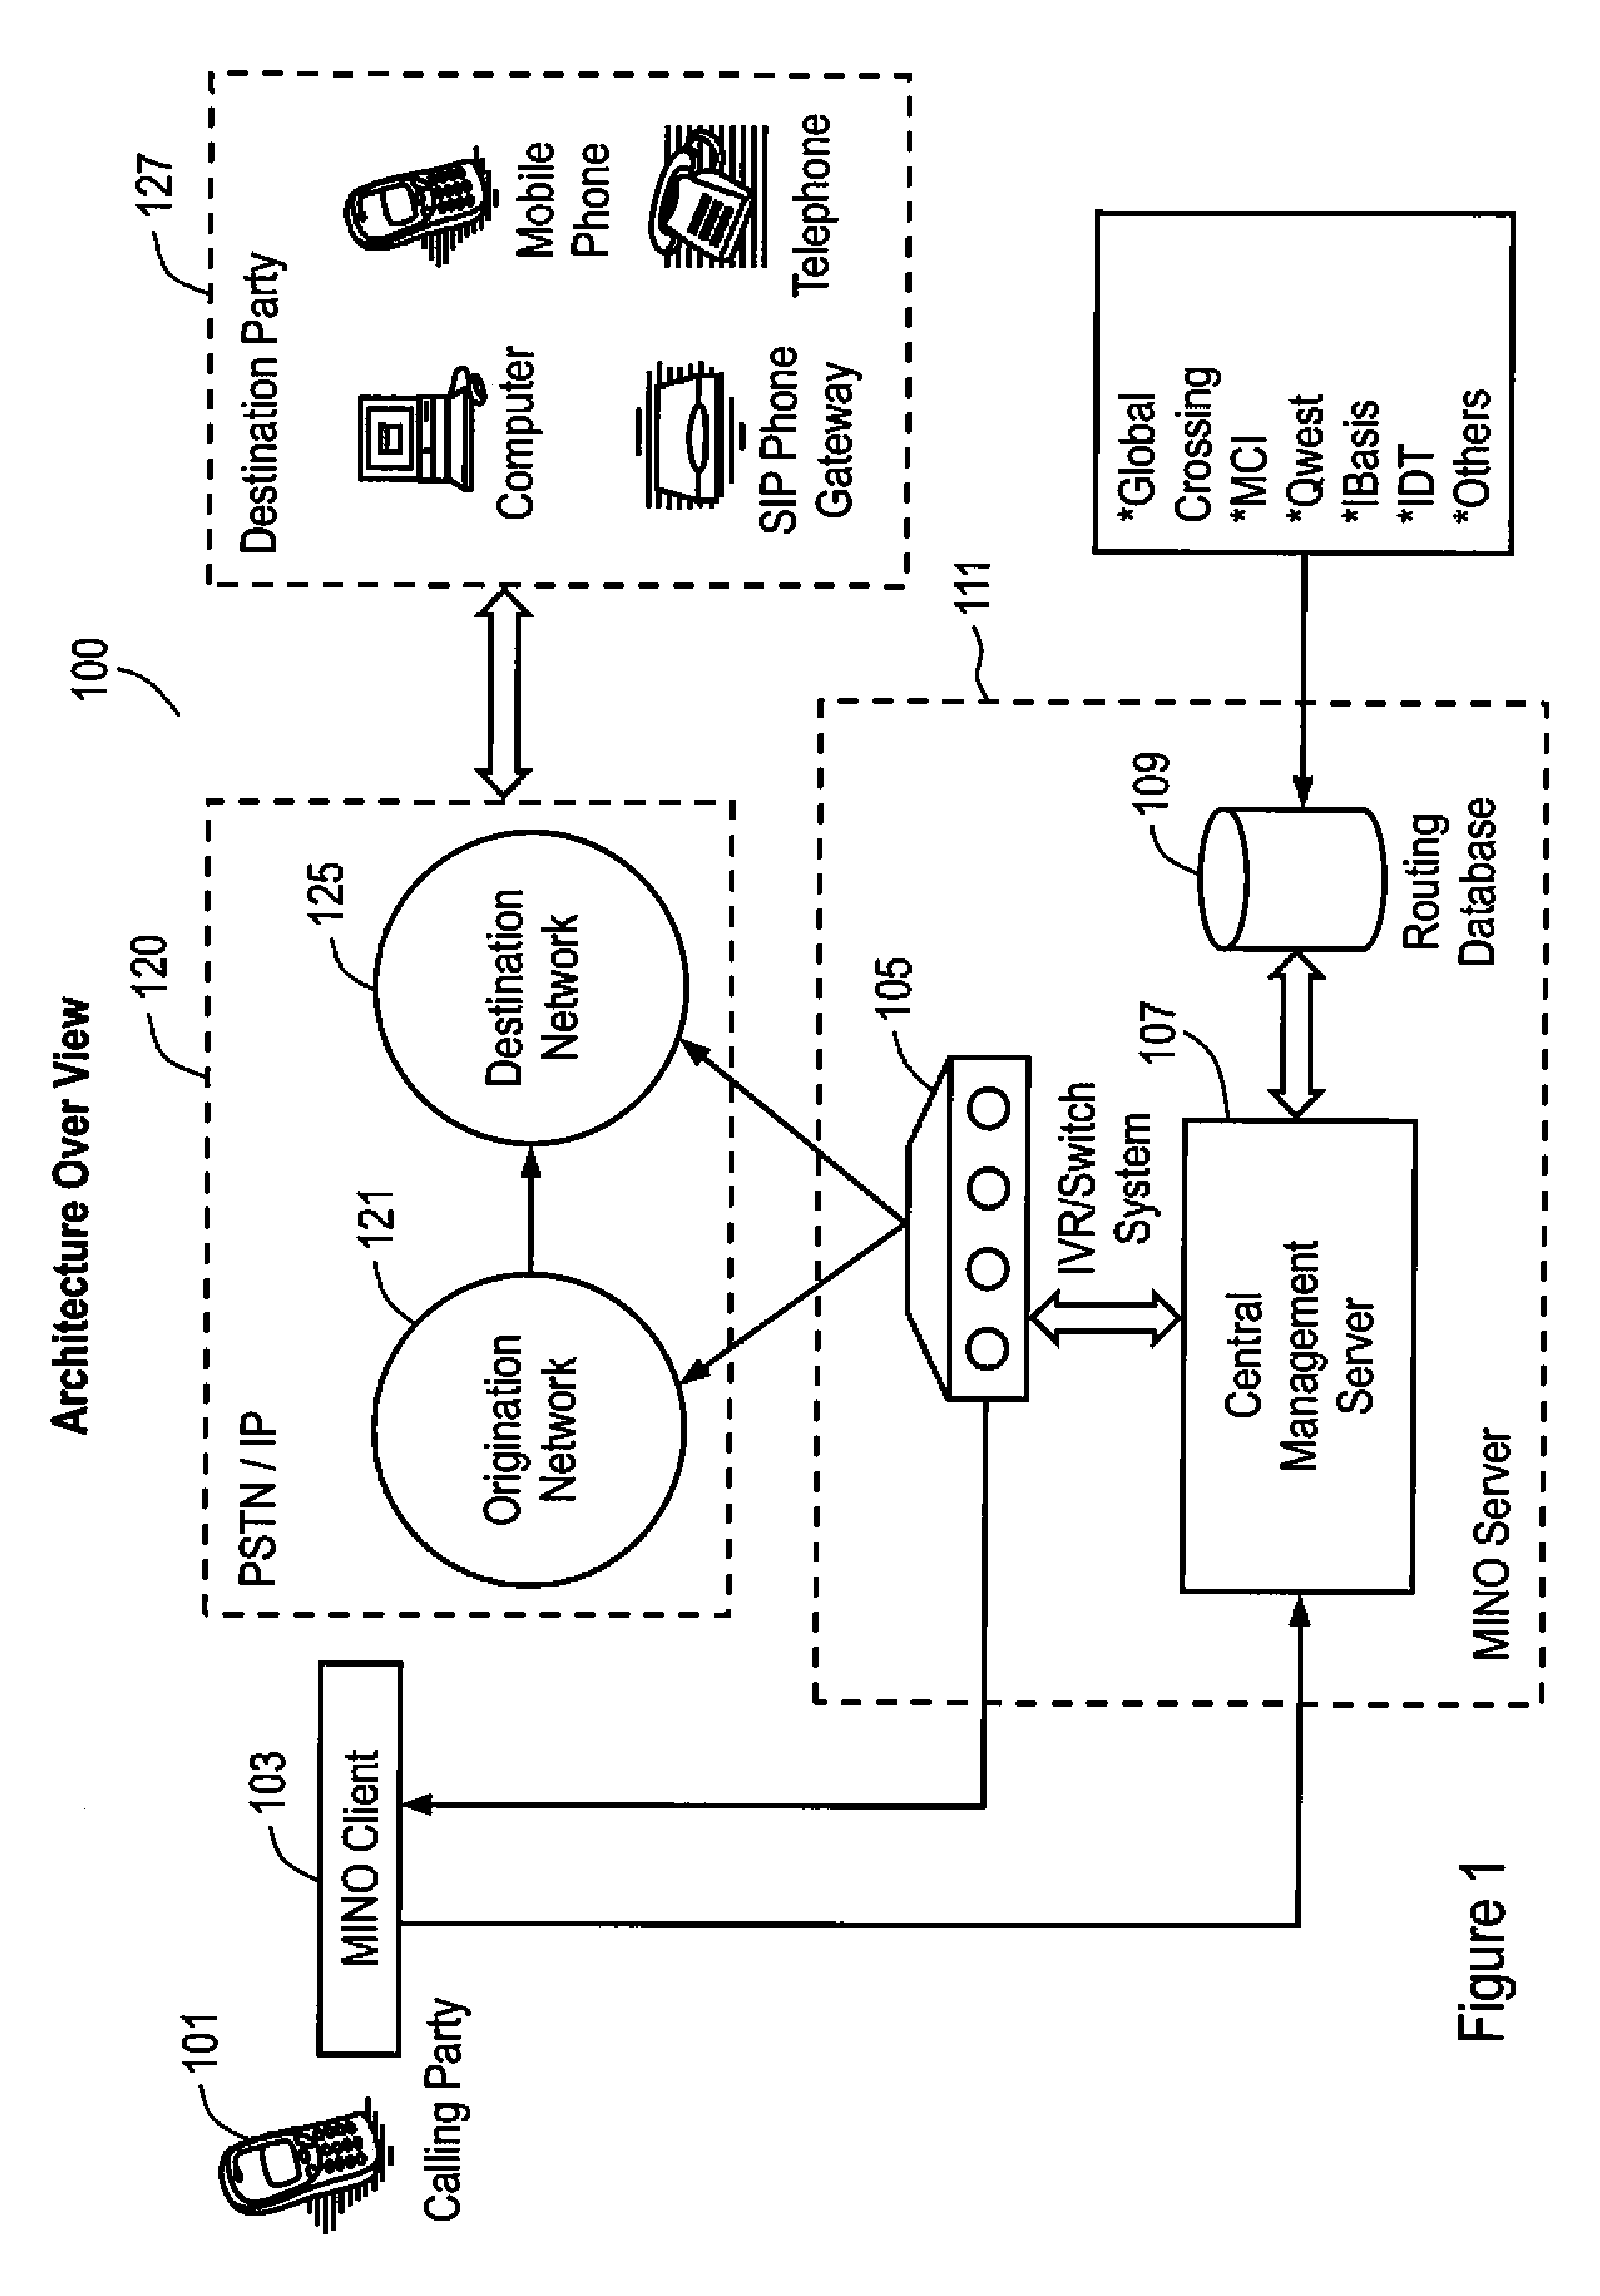 Method and System for Processing International Calls Using a Voice Over IP Process